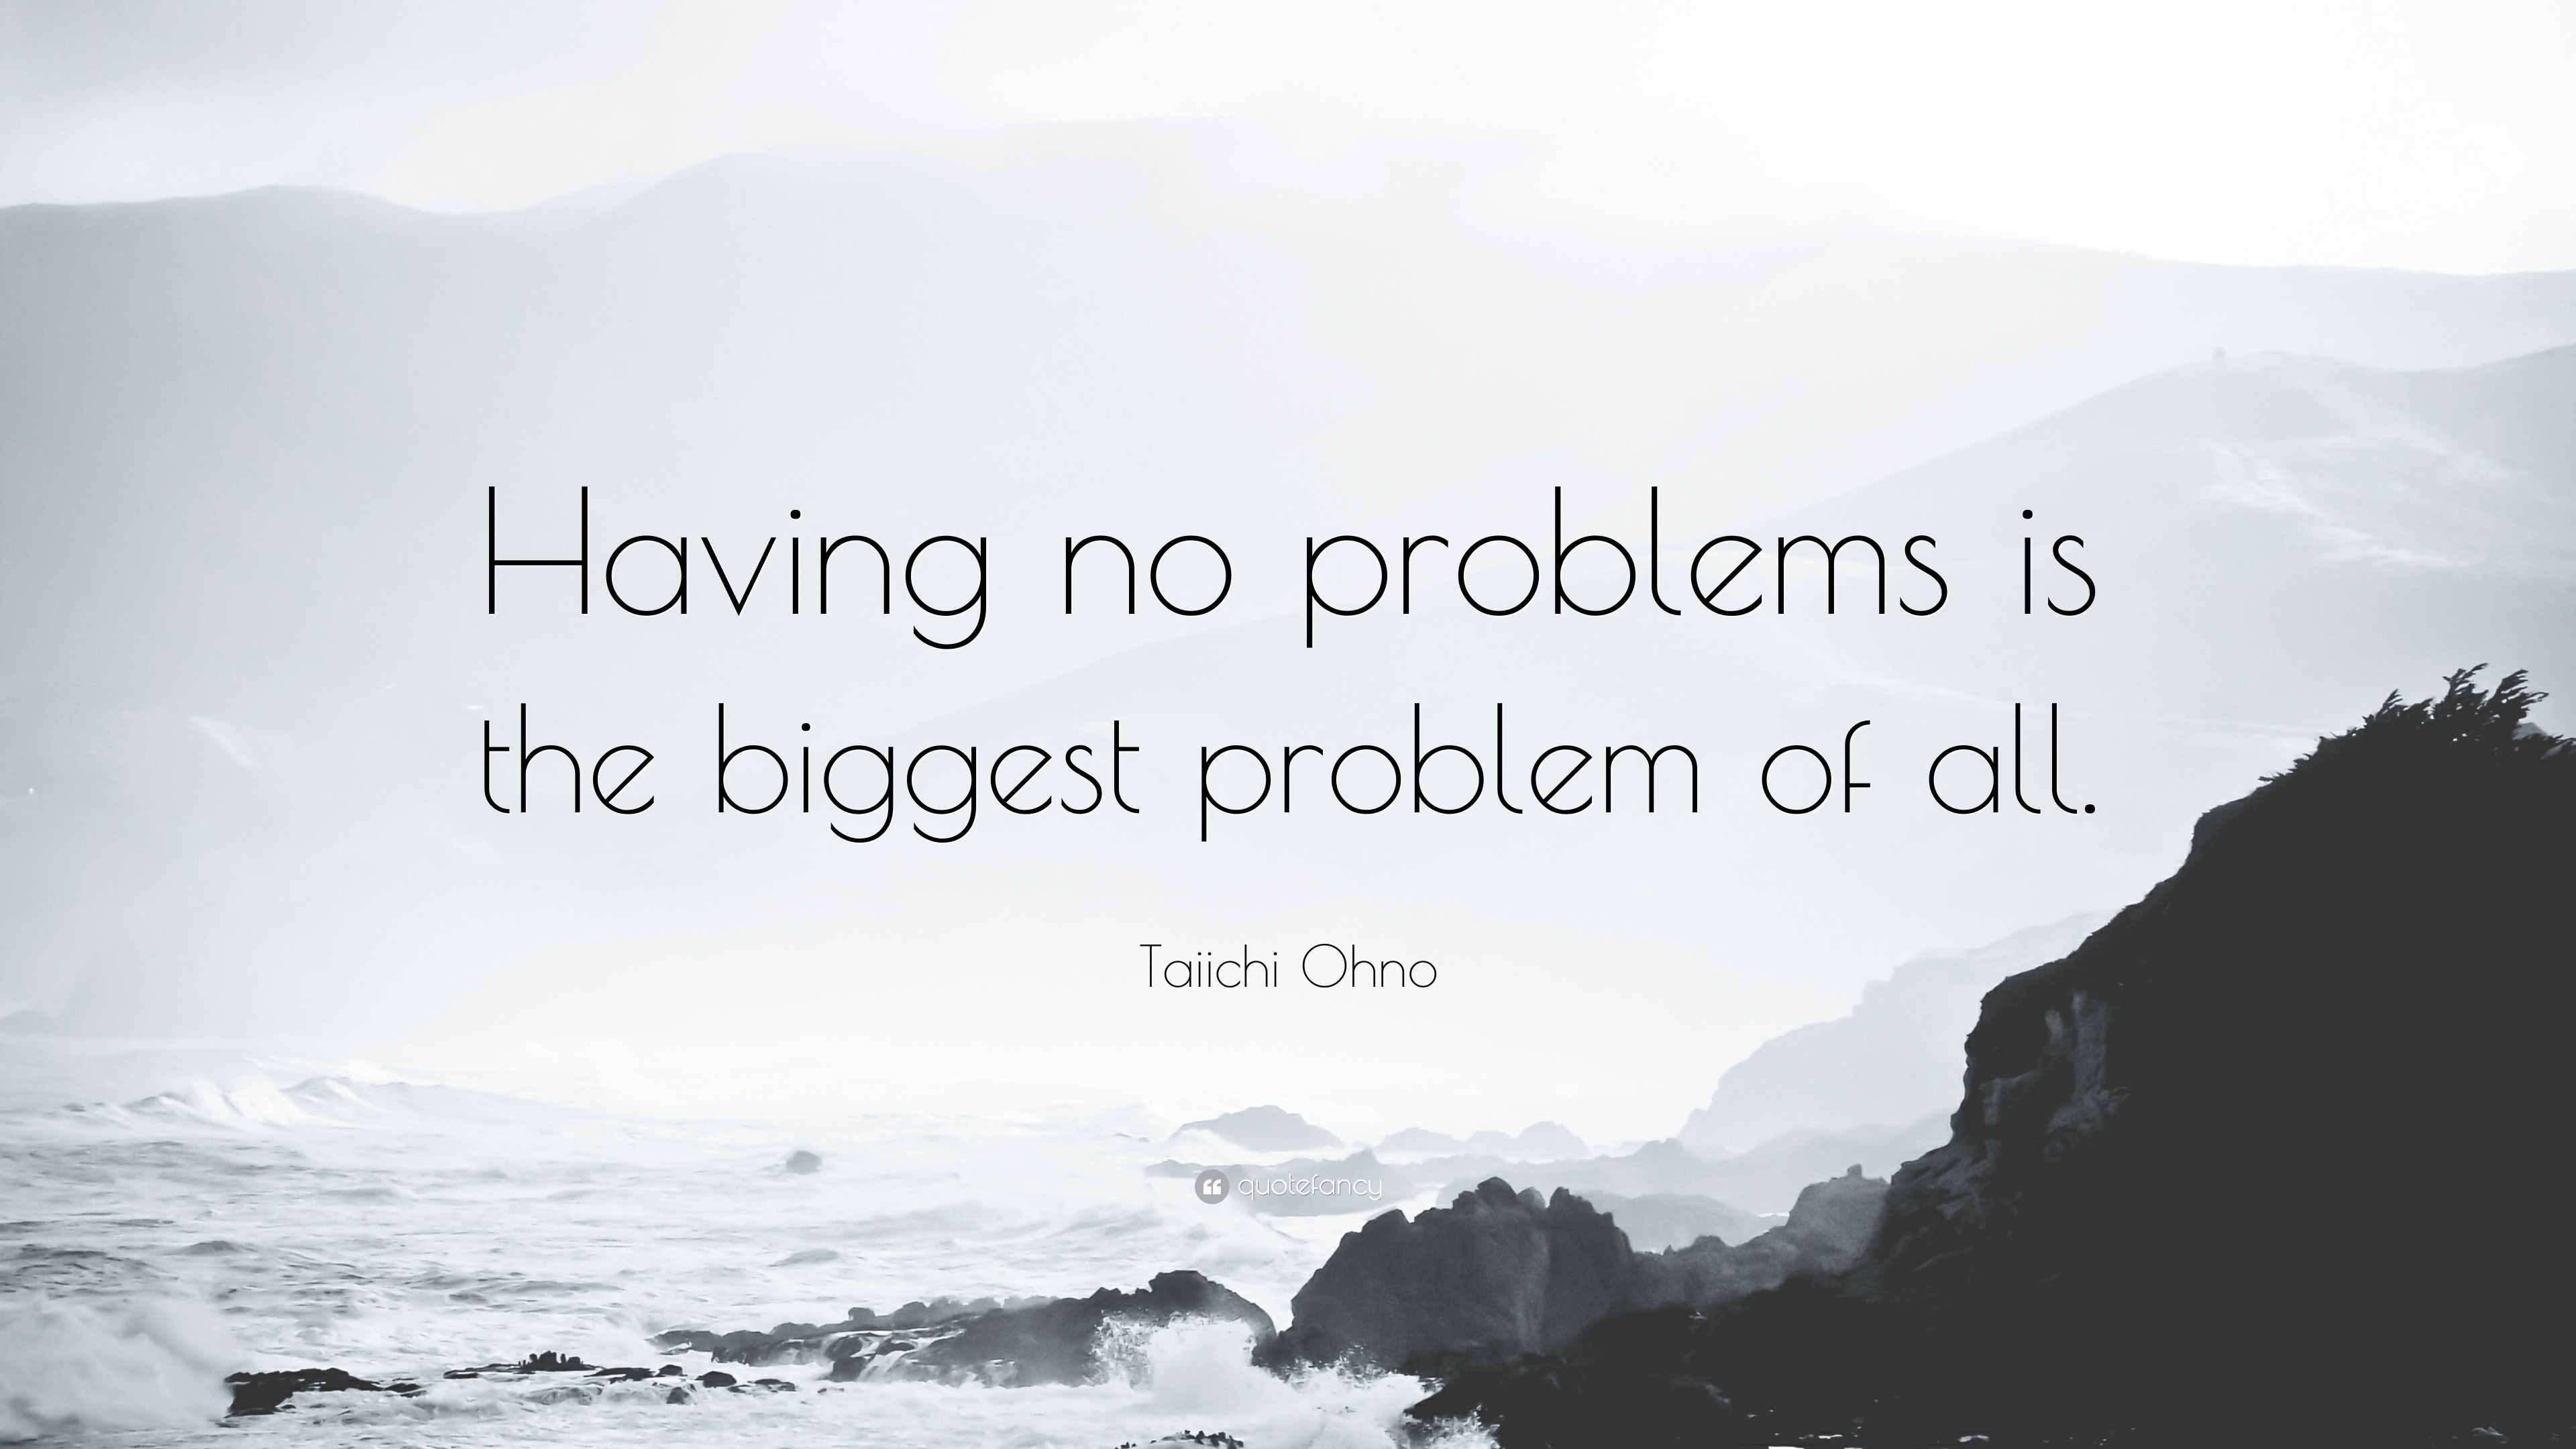 https://quotefancy.com/media/wallpaper/3840x2160/1359449-Taiichi-Ohno-Quote-Having-no-problems-is-the-biggest-problem-of.jpg